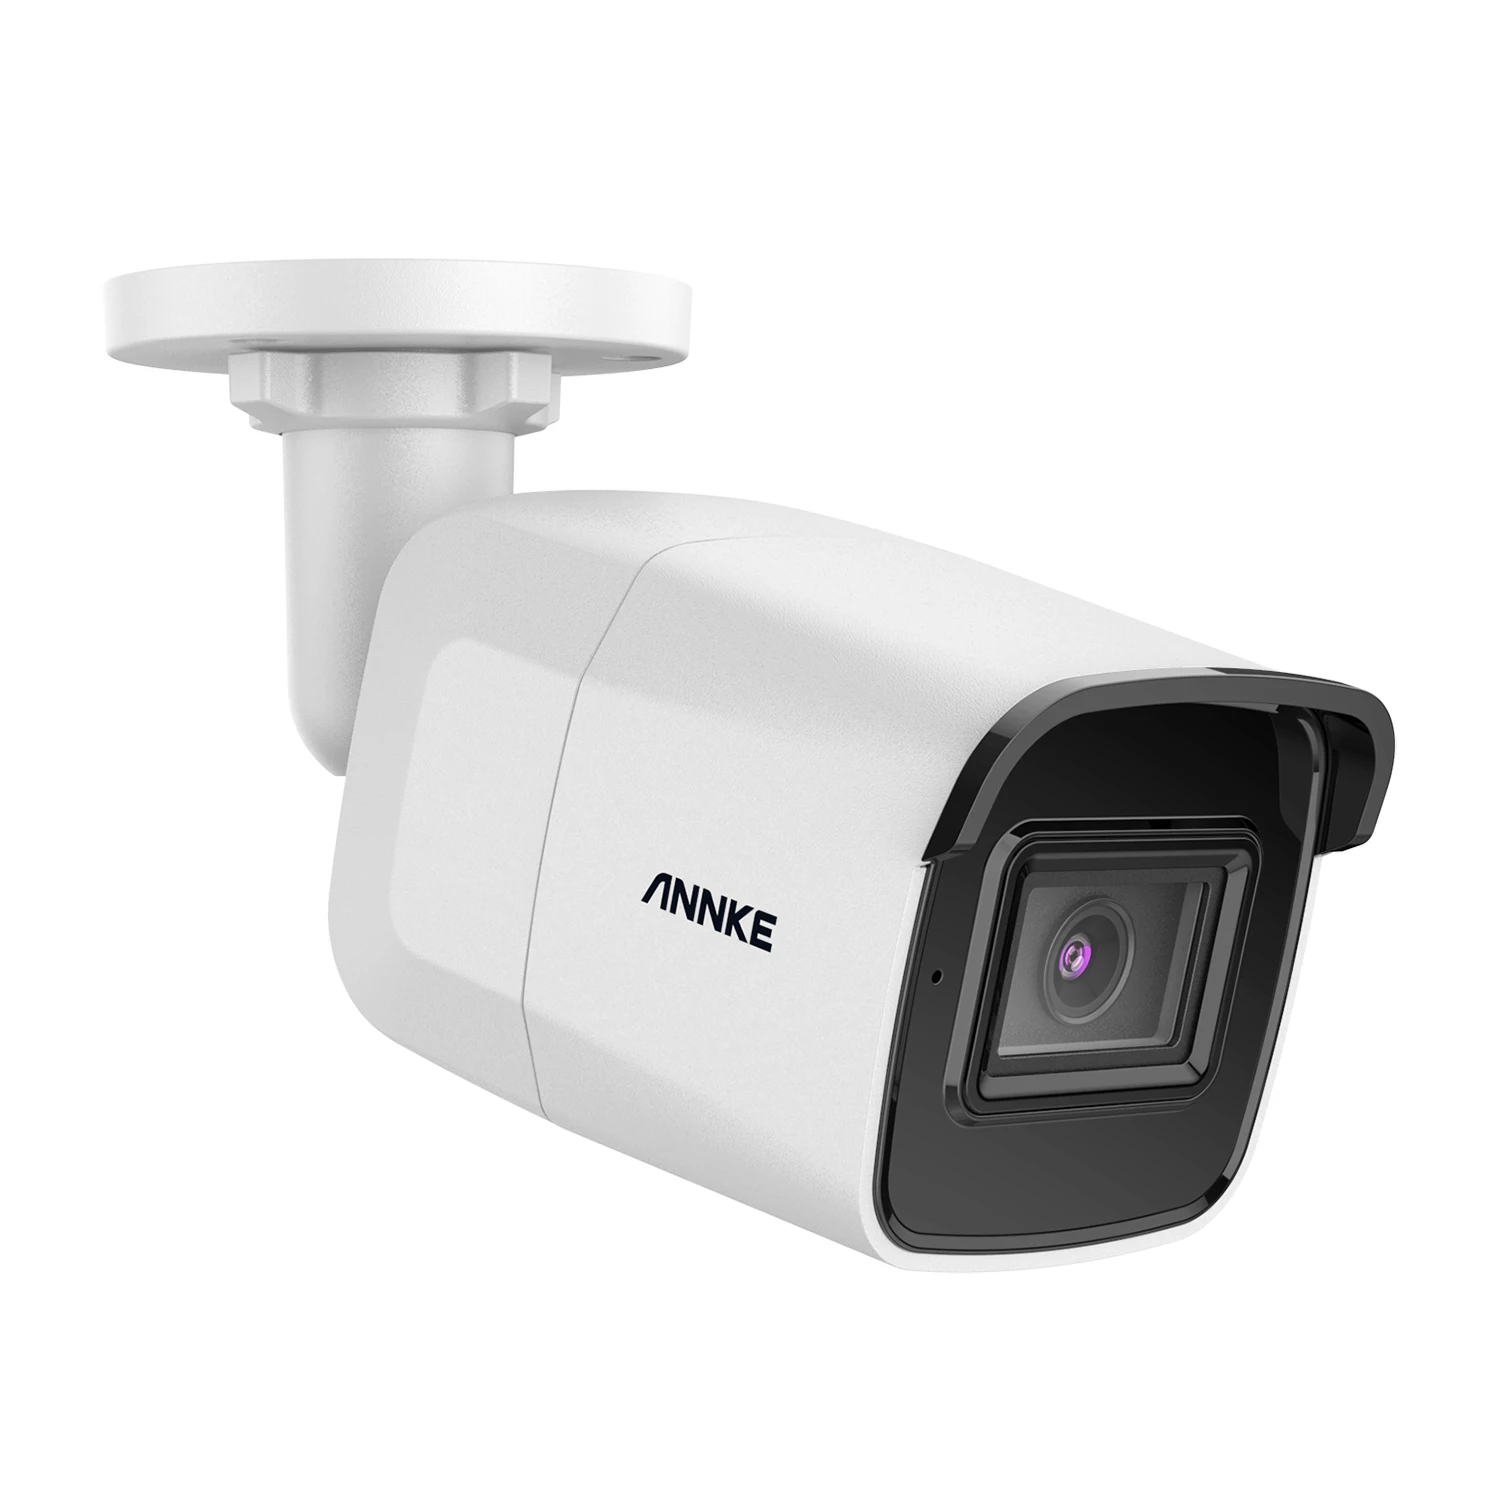 

ANNKE H265+ 8MP Network POE IP Security Camera 4K AI Human and Vehicle detection Outdoor CCTV Camera with Audio